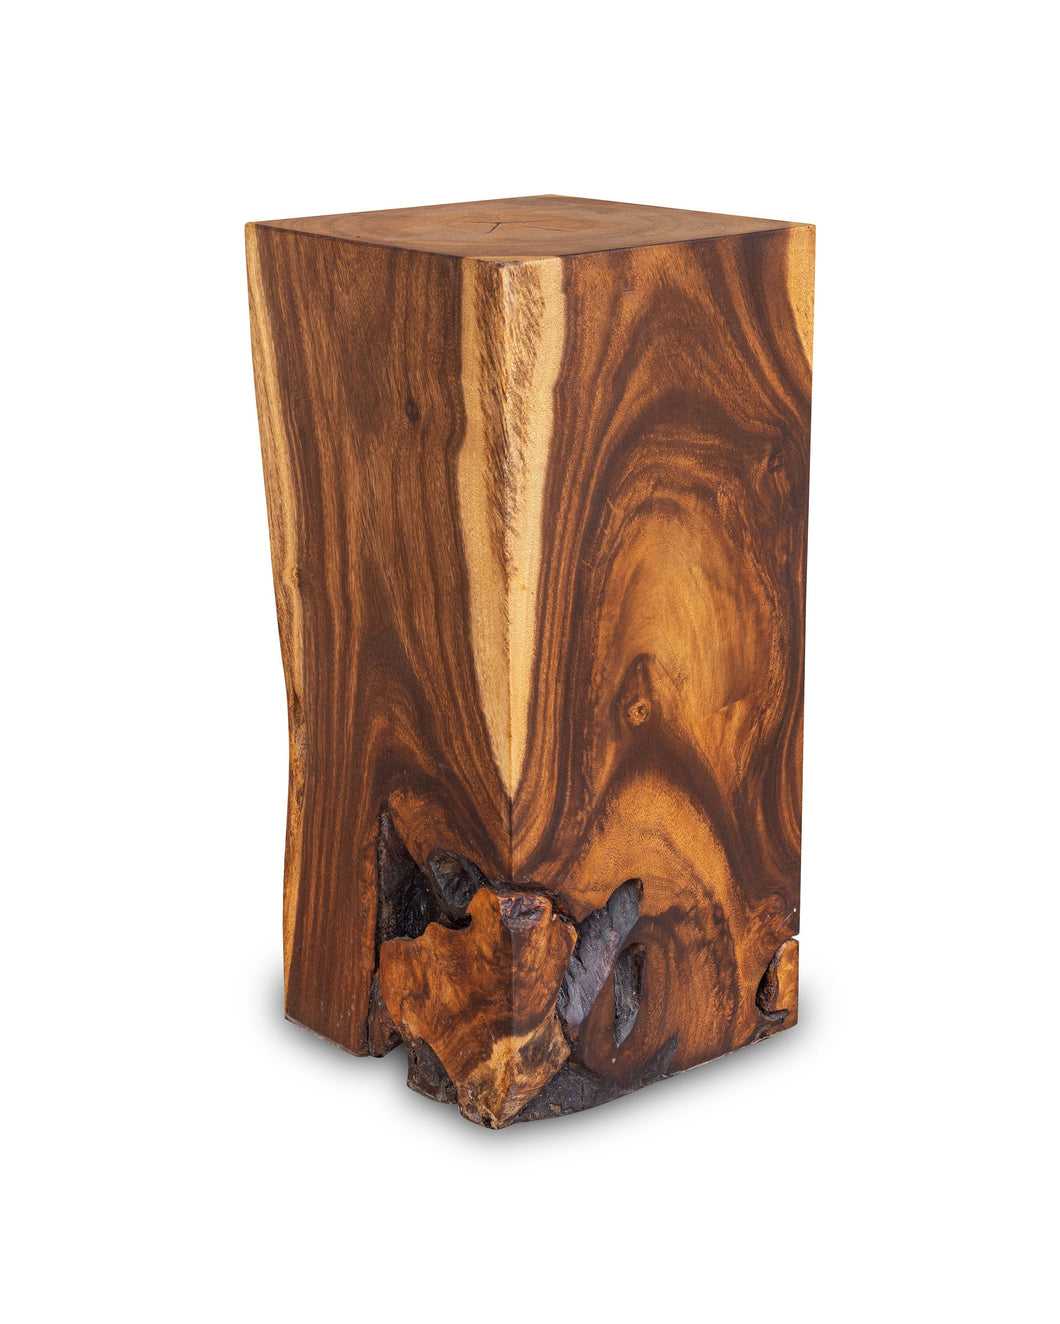 Square Solid Acacia Wood Side Table, Brown Natural Tree Stump Stool or End Table #B2